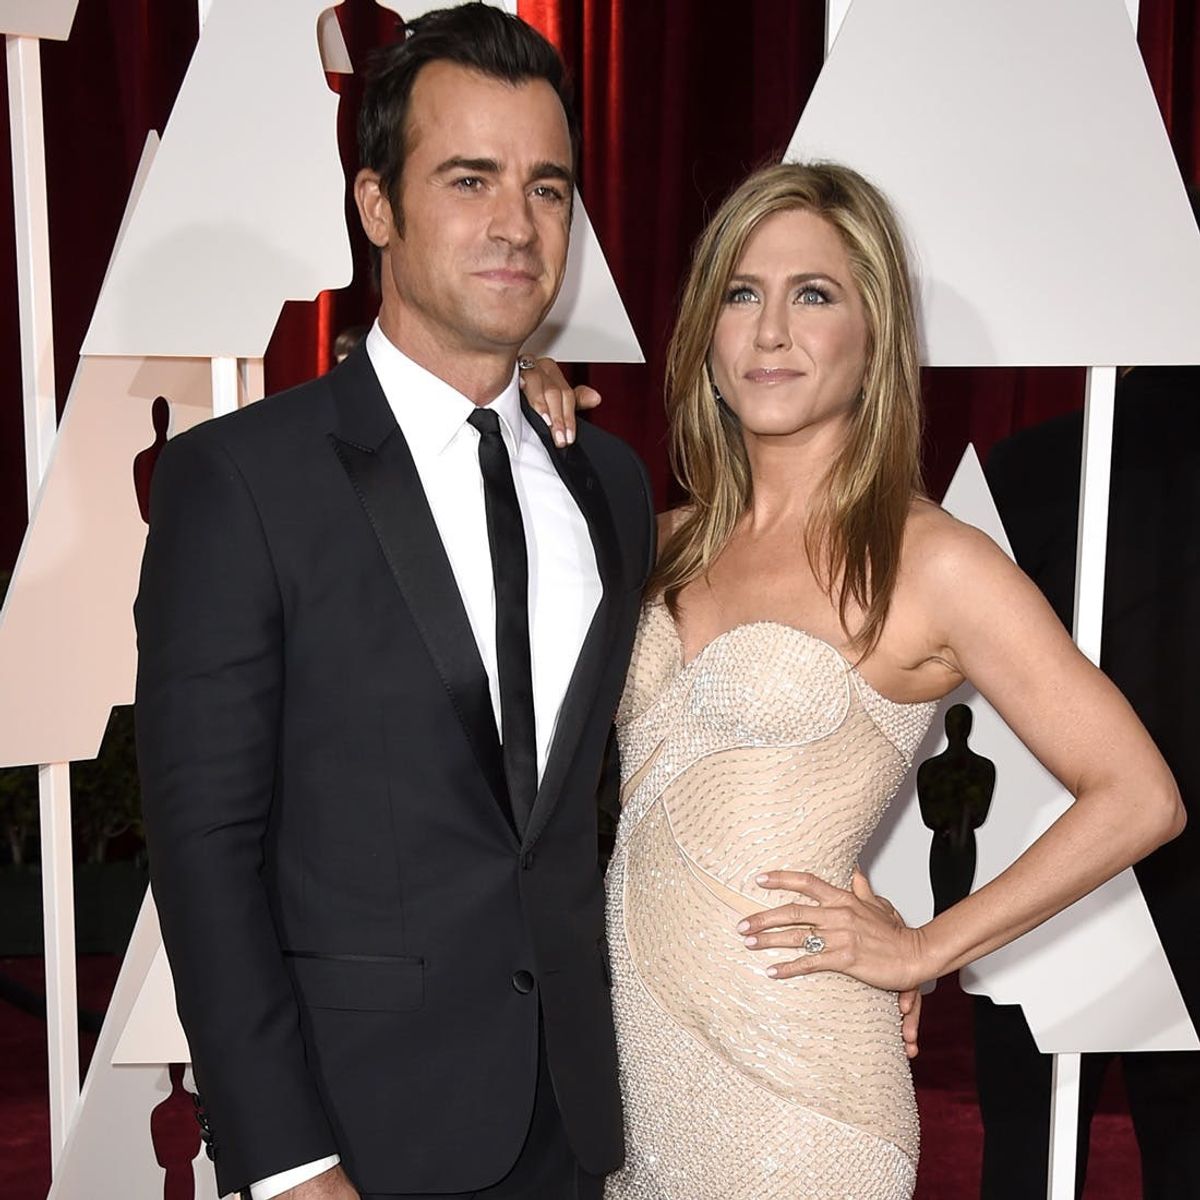 See Jennifer Aniston’s Non-Traditional Wedding Ring + Similar Styles You Can Shop